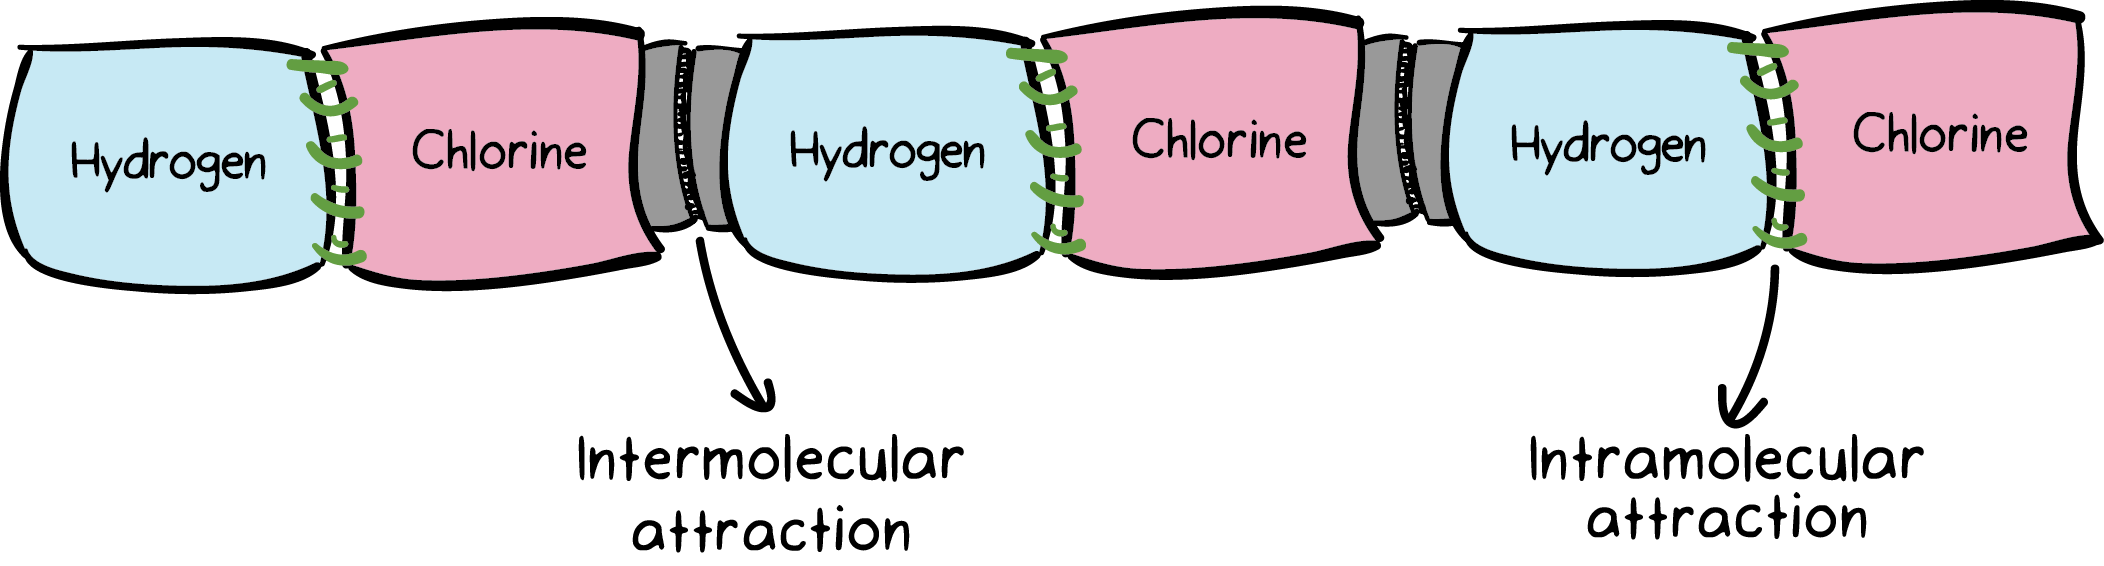 Figure of towels sewn and Velcroed representing bonds between hydrogen and chlorine atoms, illustrating intermolar and intramolar attractions